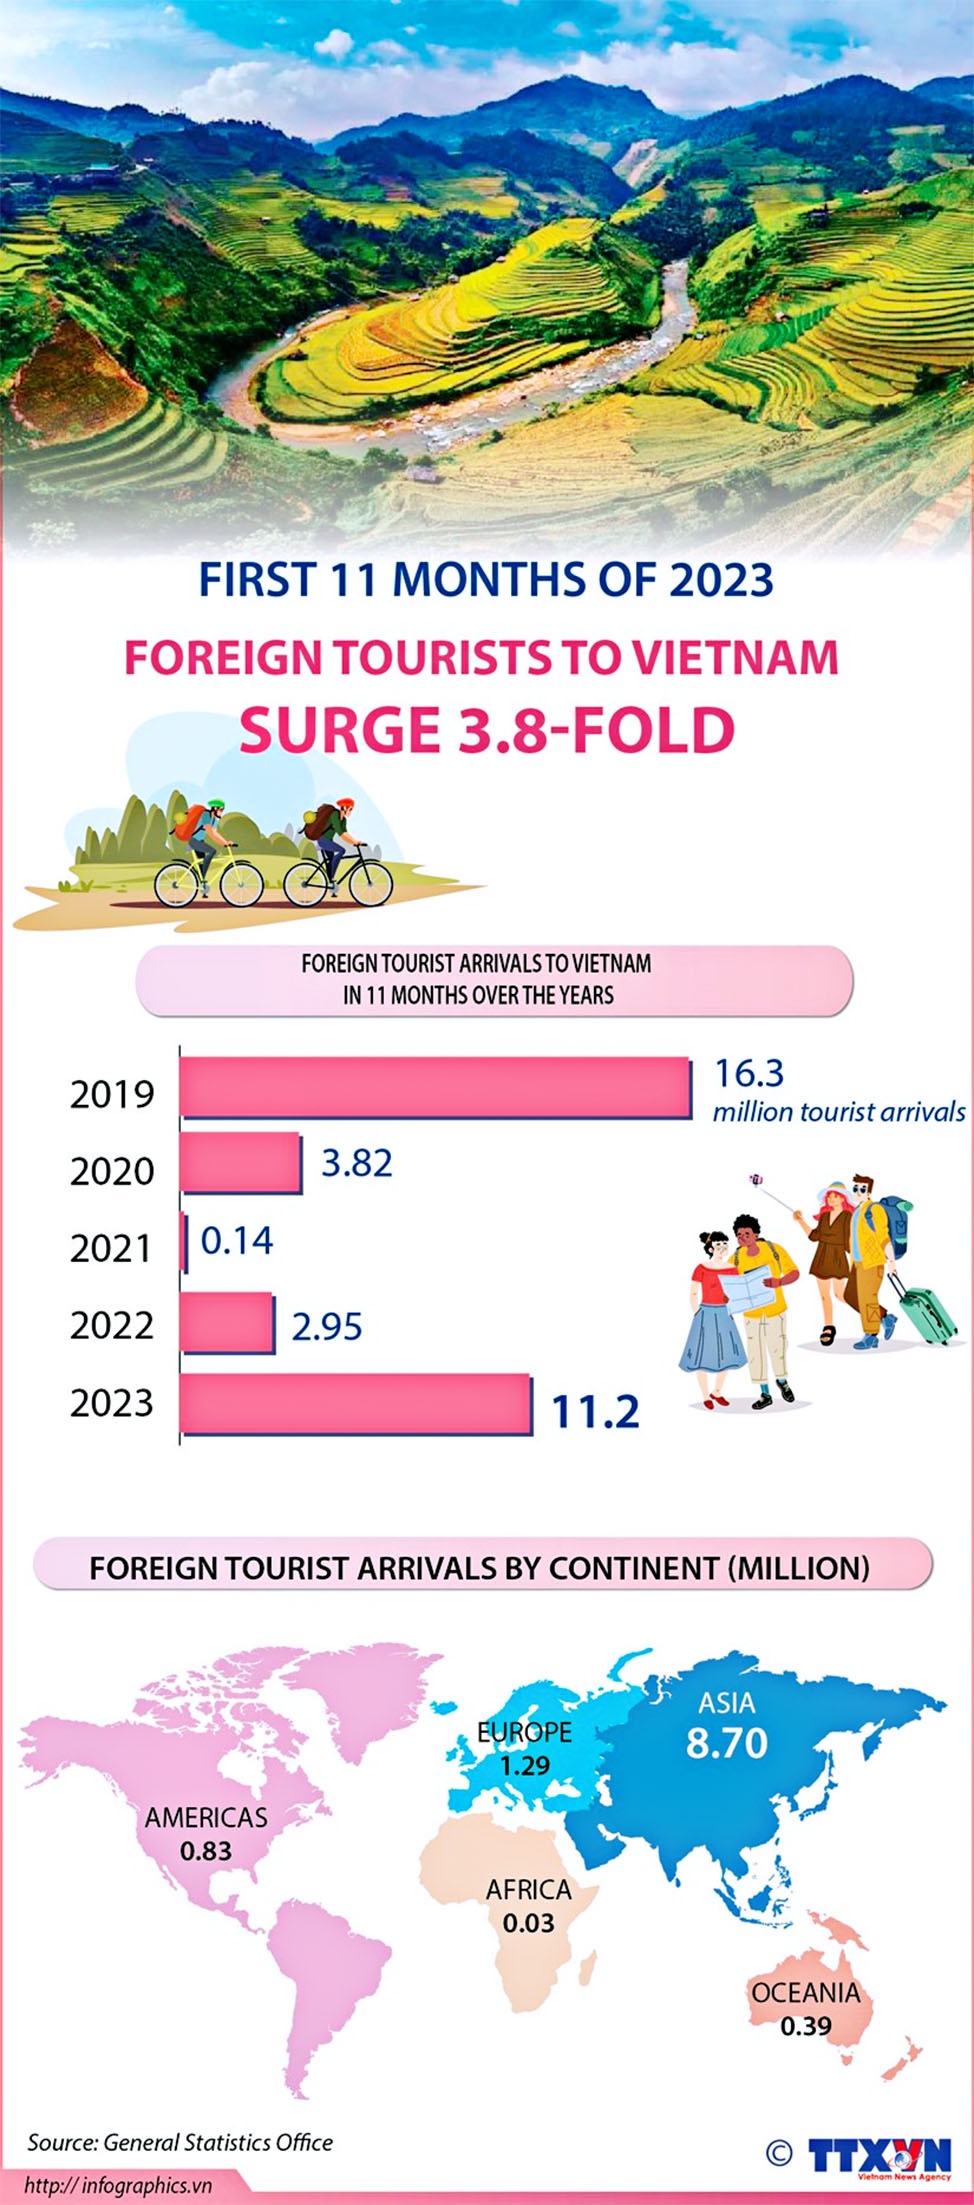 Foreign tourists to Vietnam surge 3.8-fold in 11 months of 2023